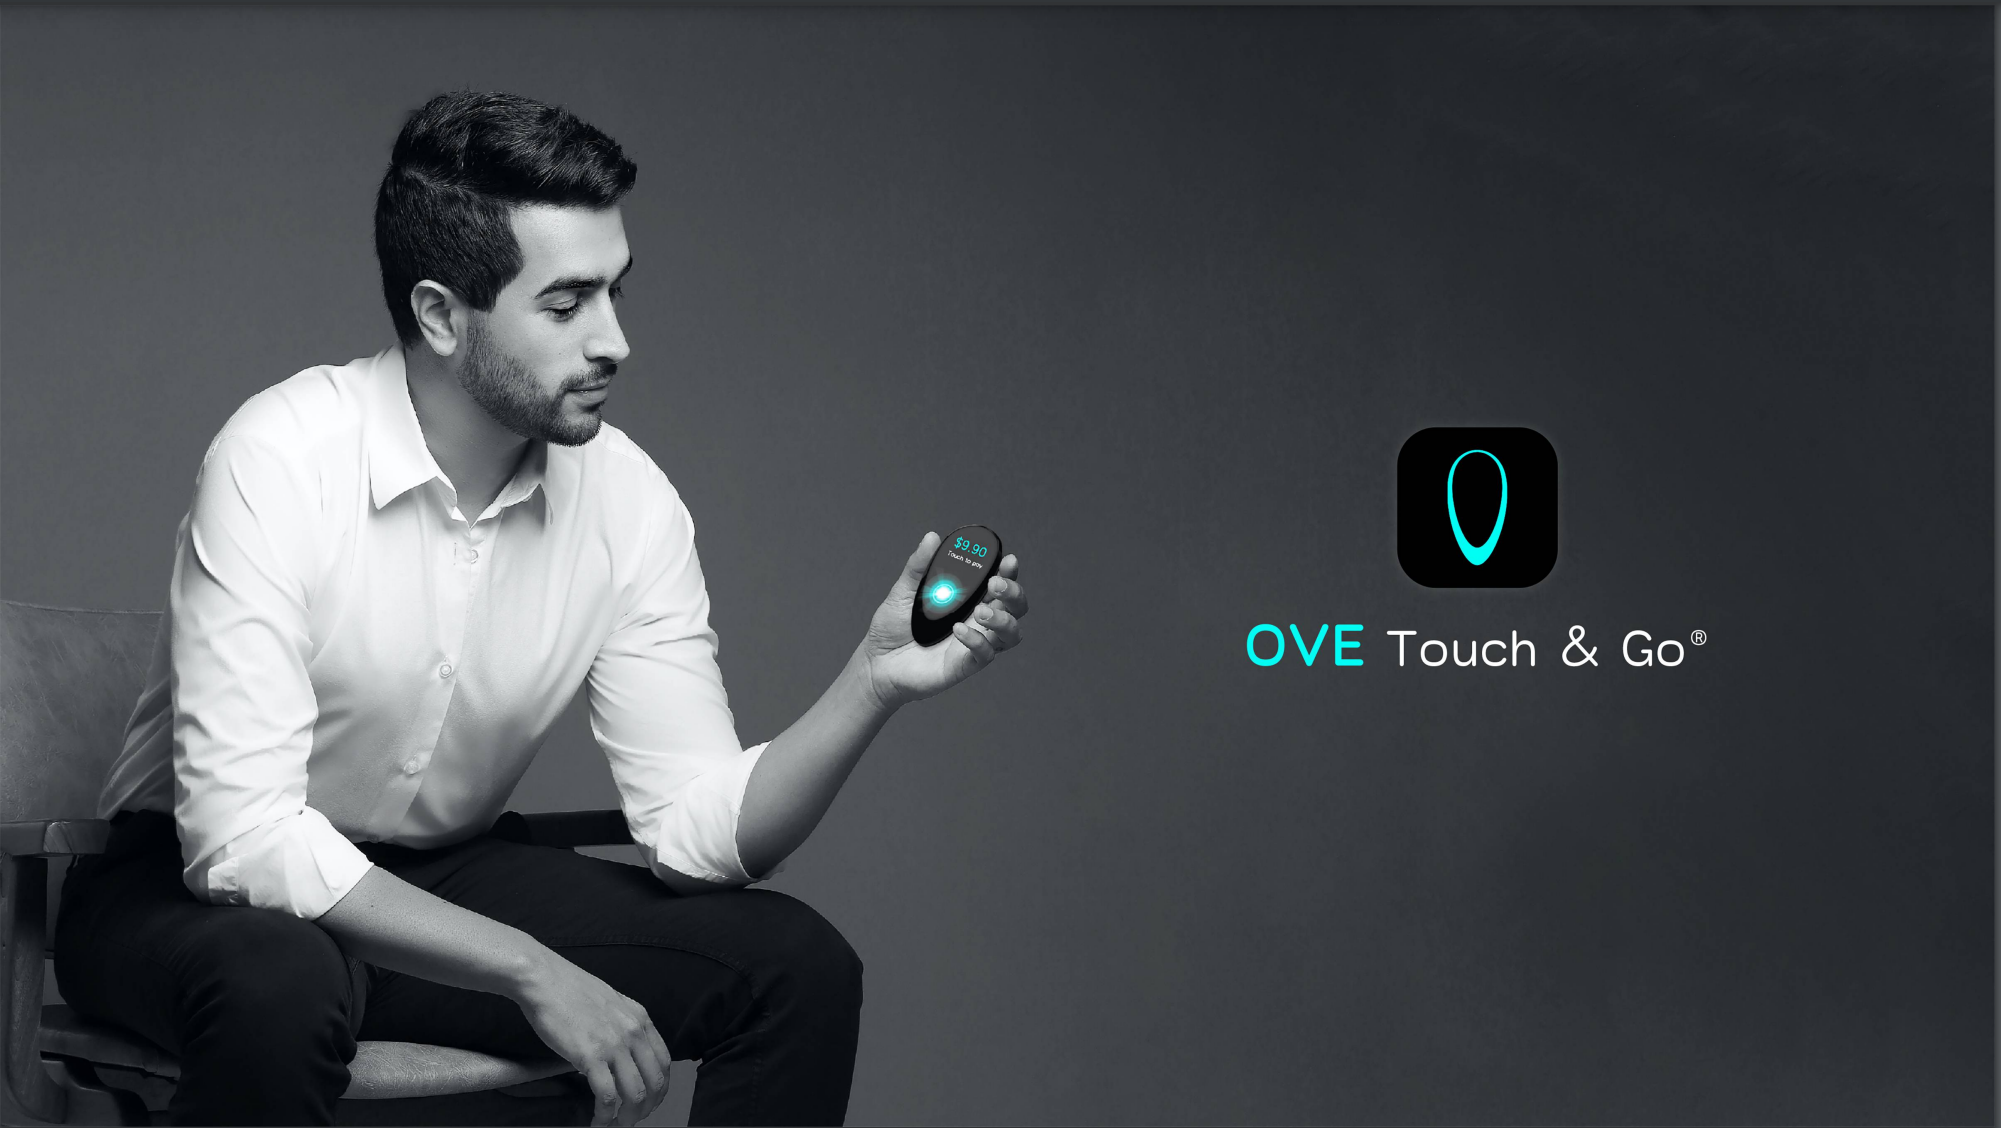  OVE Touch & Go, Monday, March 20, 2023, Press release picture